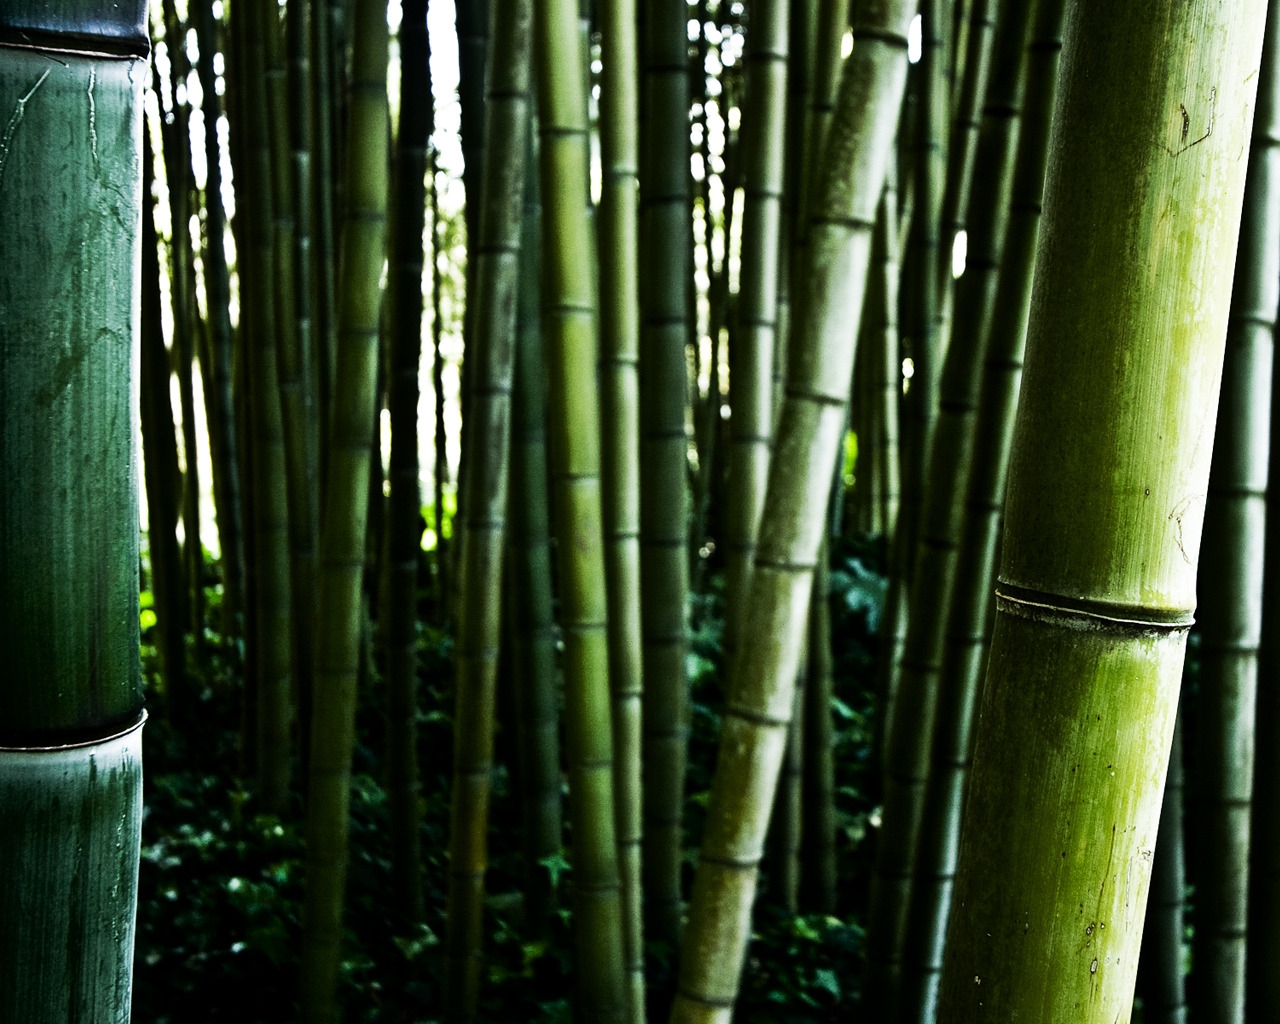 Bamboo stalks for 1280 x 1024 resolution